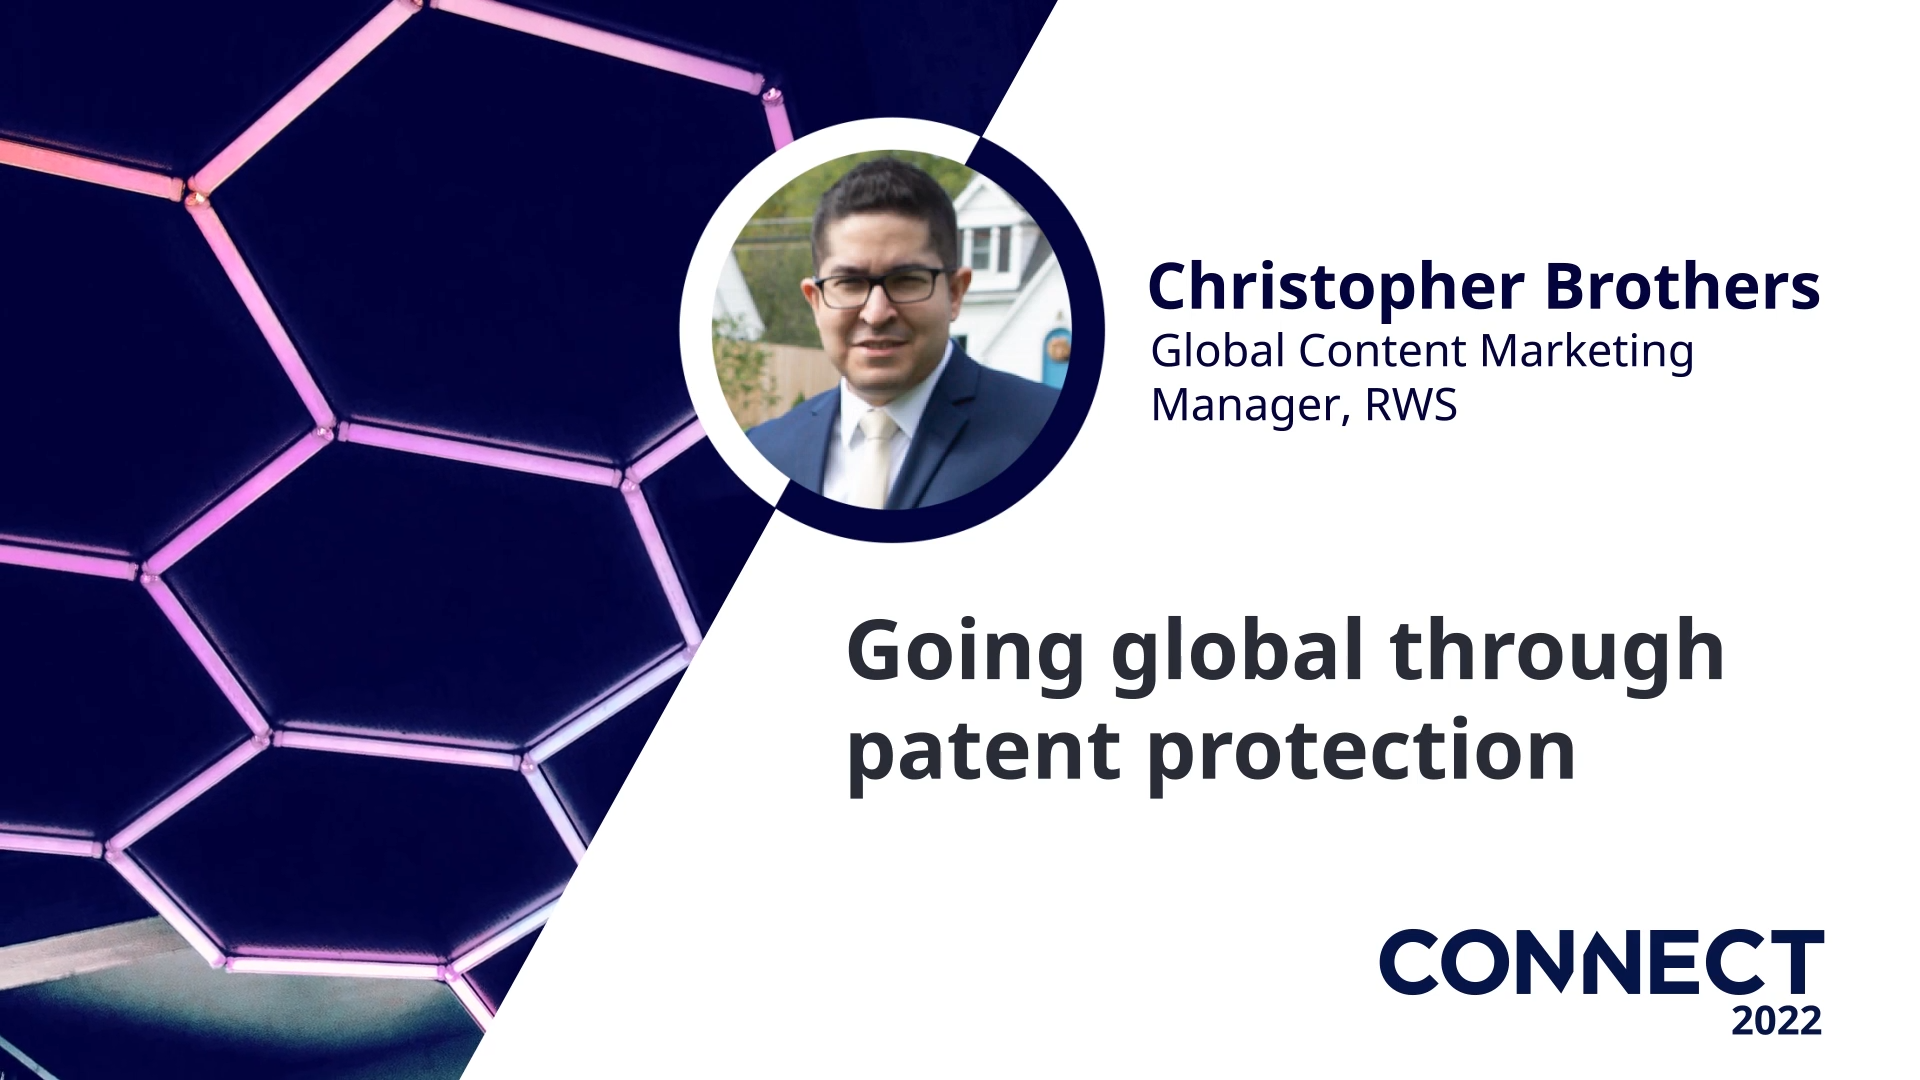 Connect 2022 - Going global through patent protection